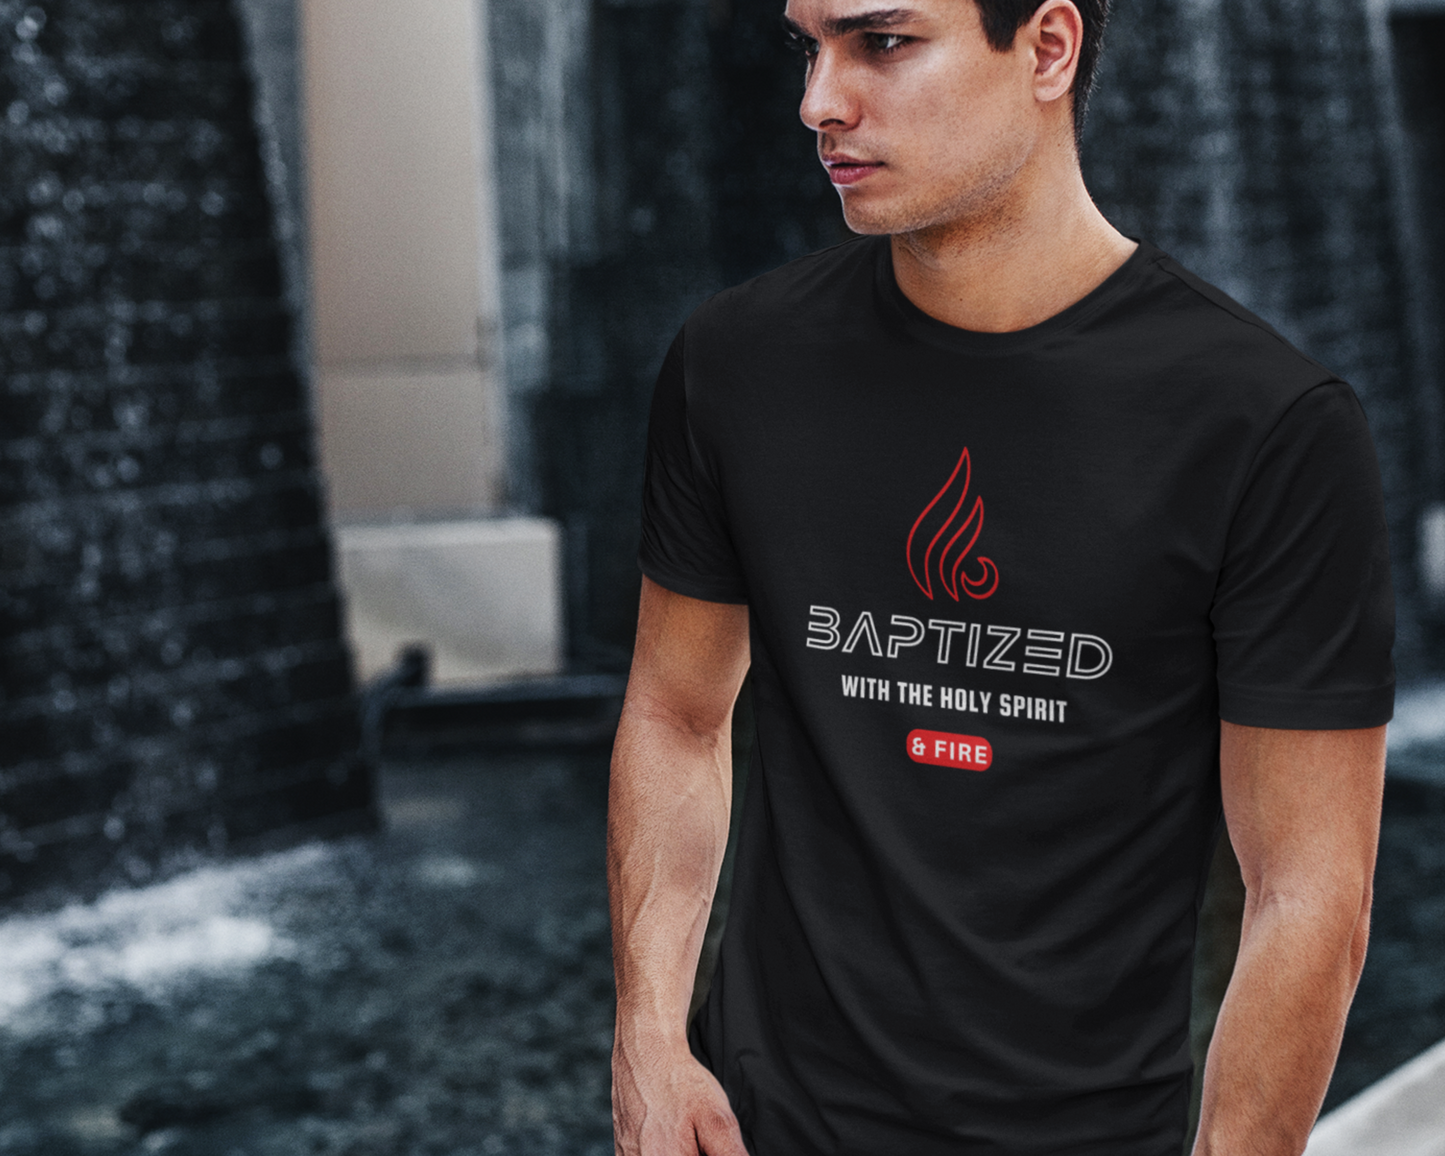 Baptized with the Holy Spirit Mens Christian T-Shirt